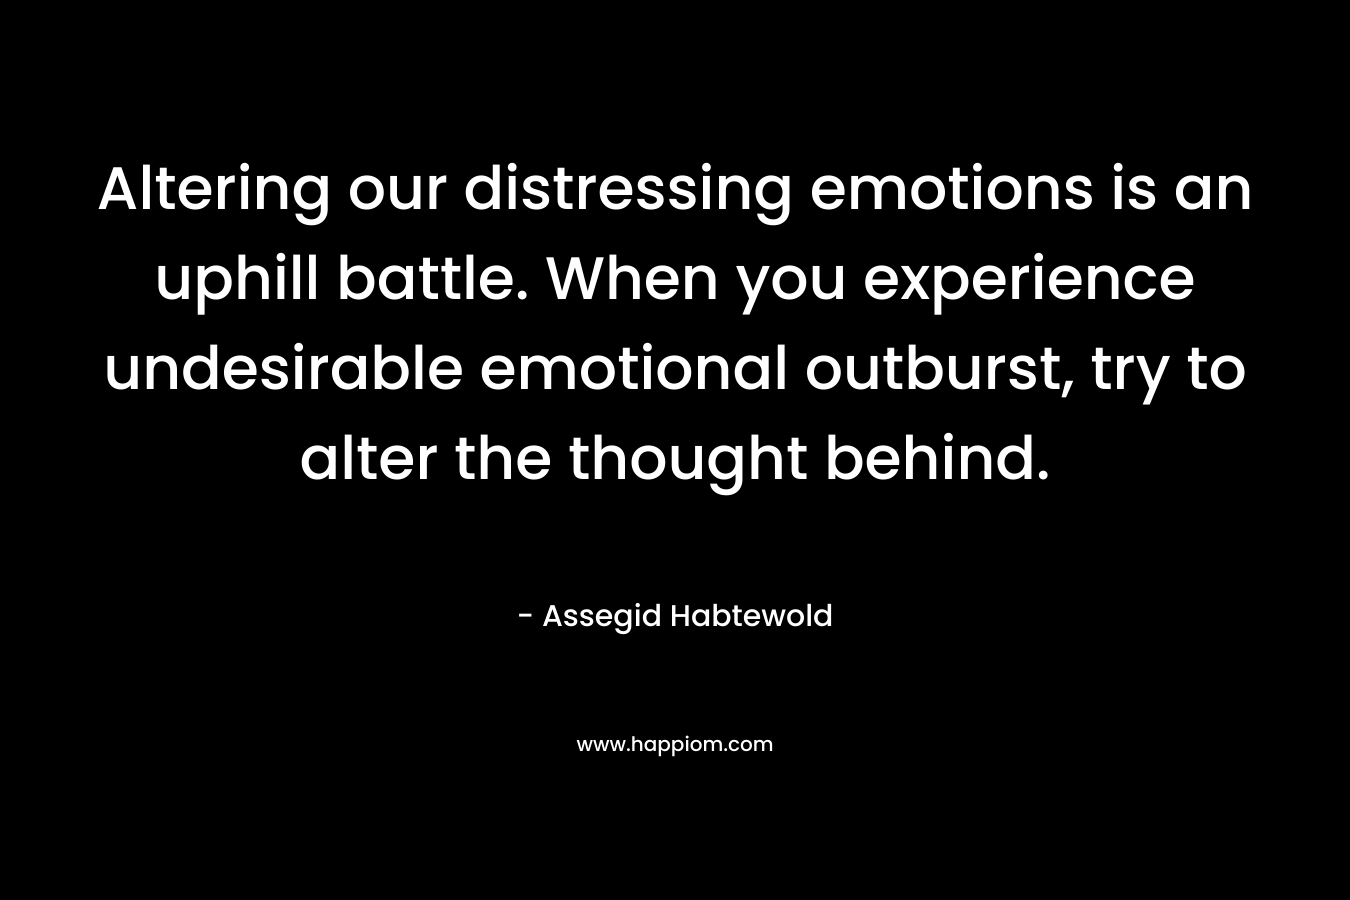 Altering our distressing emotions is an uphill battle. When you experience undesirable emotional outburst, try to alter the thought behind. – Assegid Habtewold